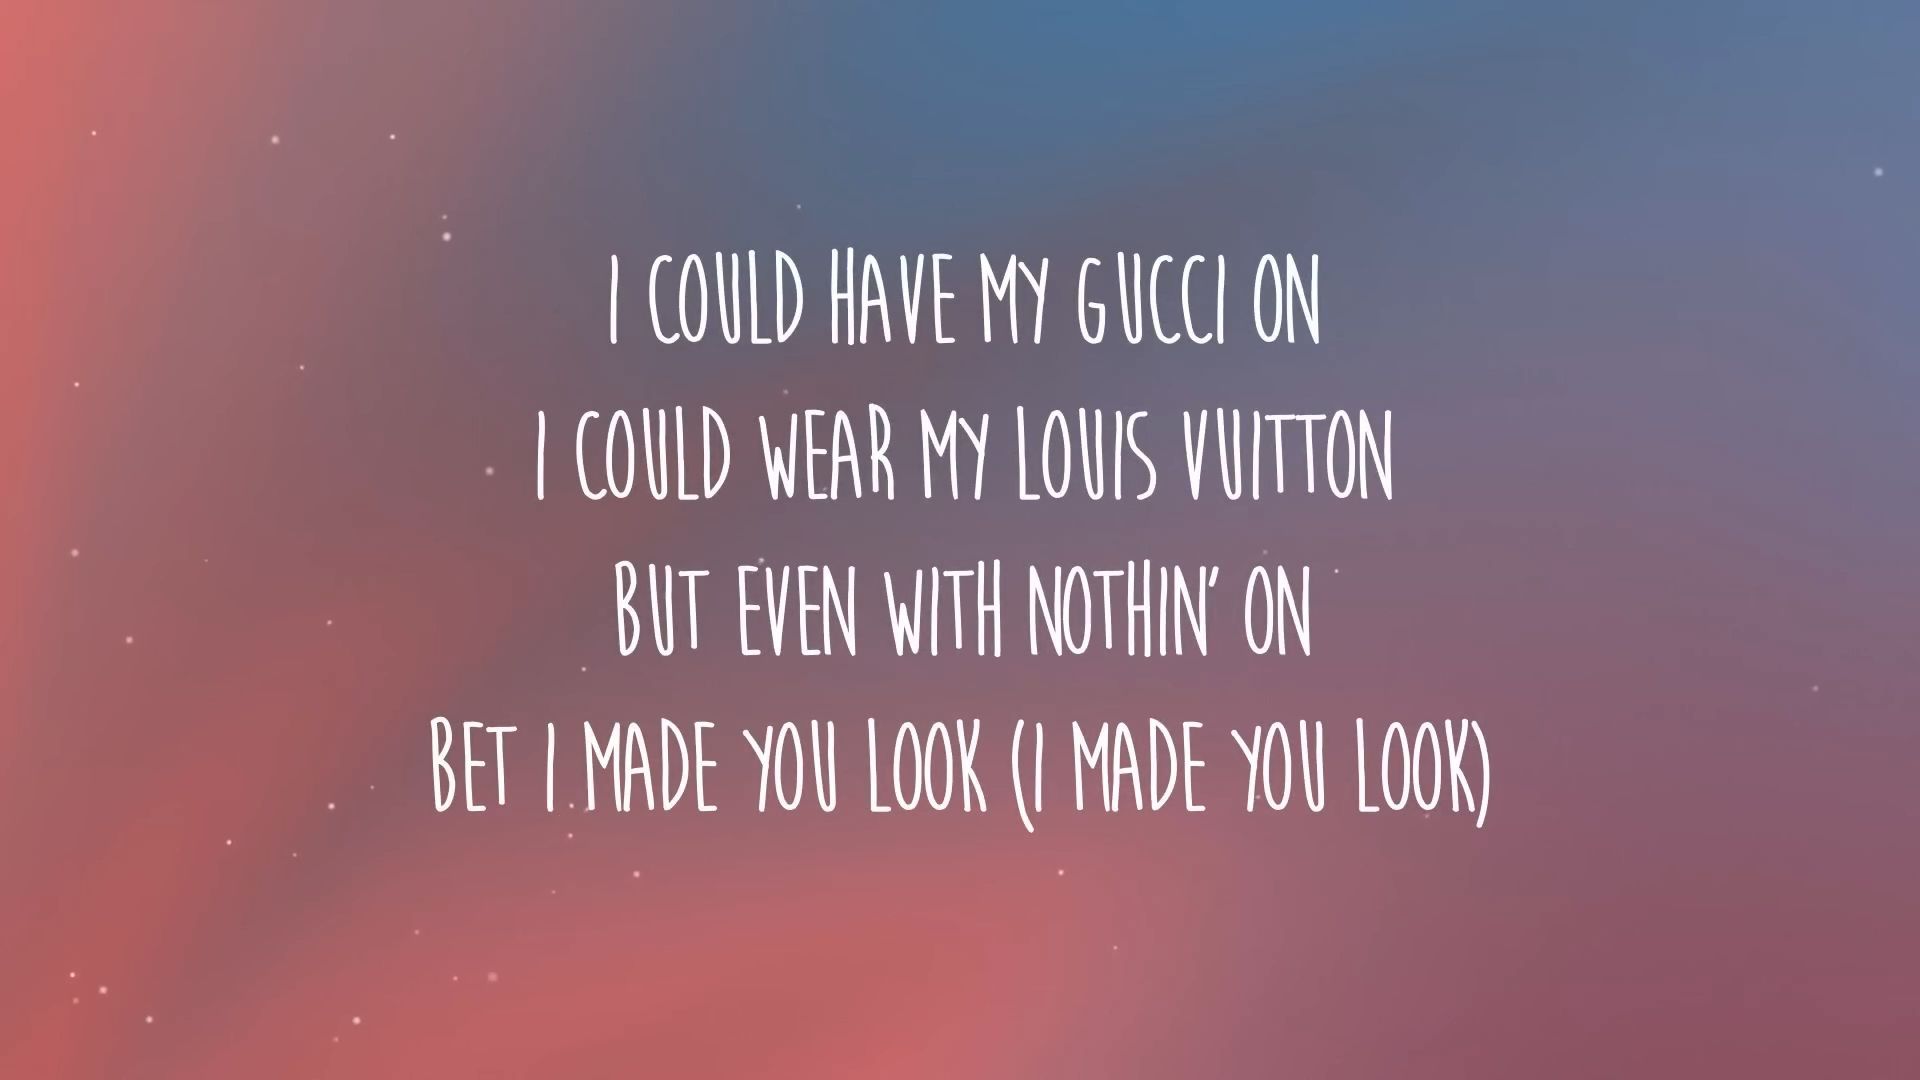 Meghan Trainor - Made You Look (Lyrics) I *could have* my gucci